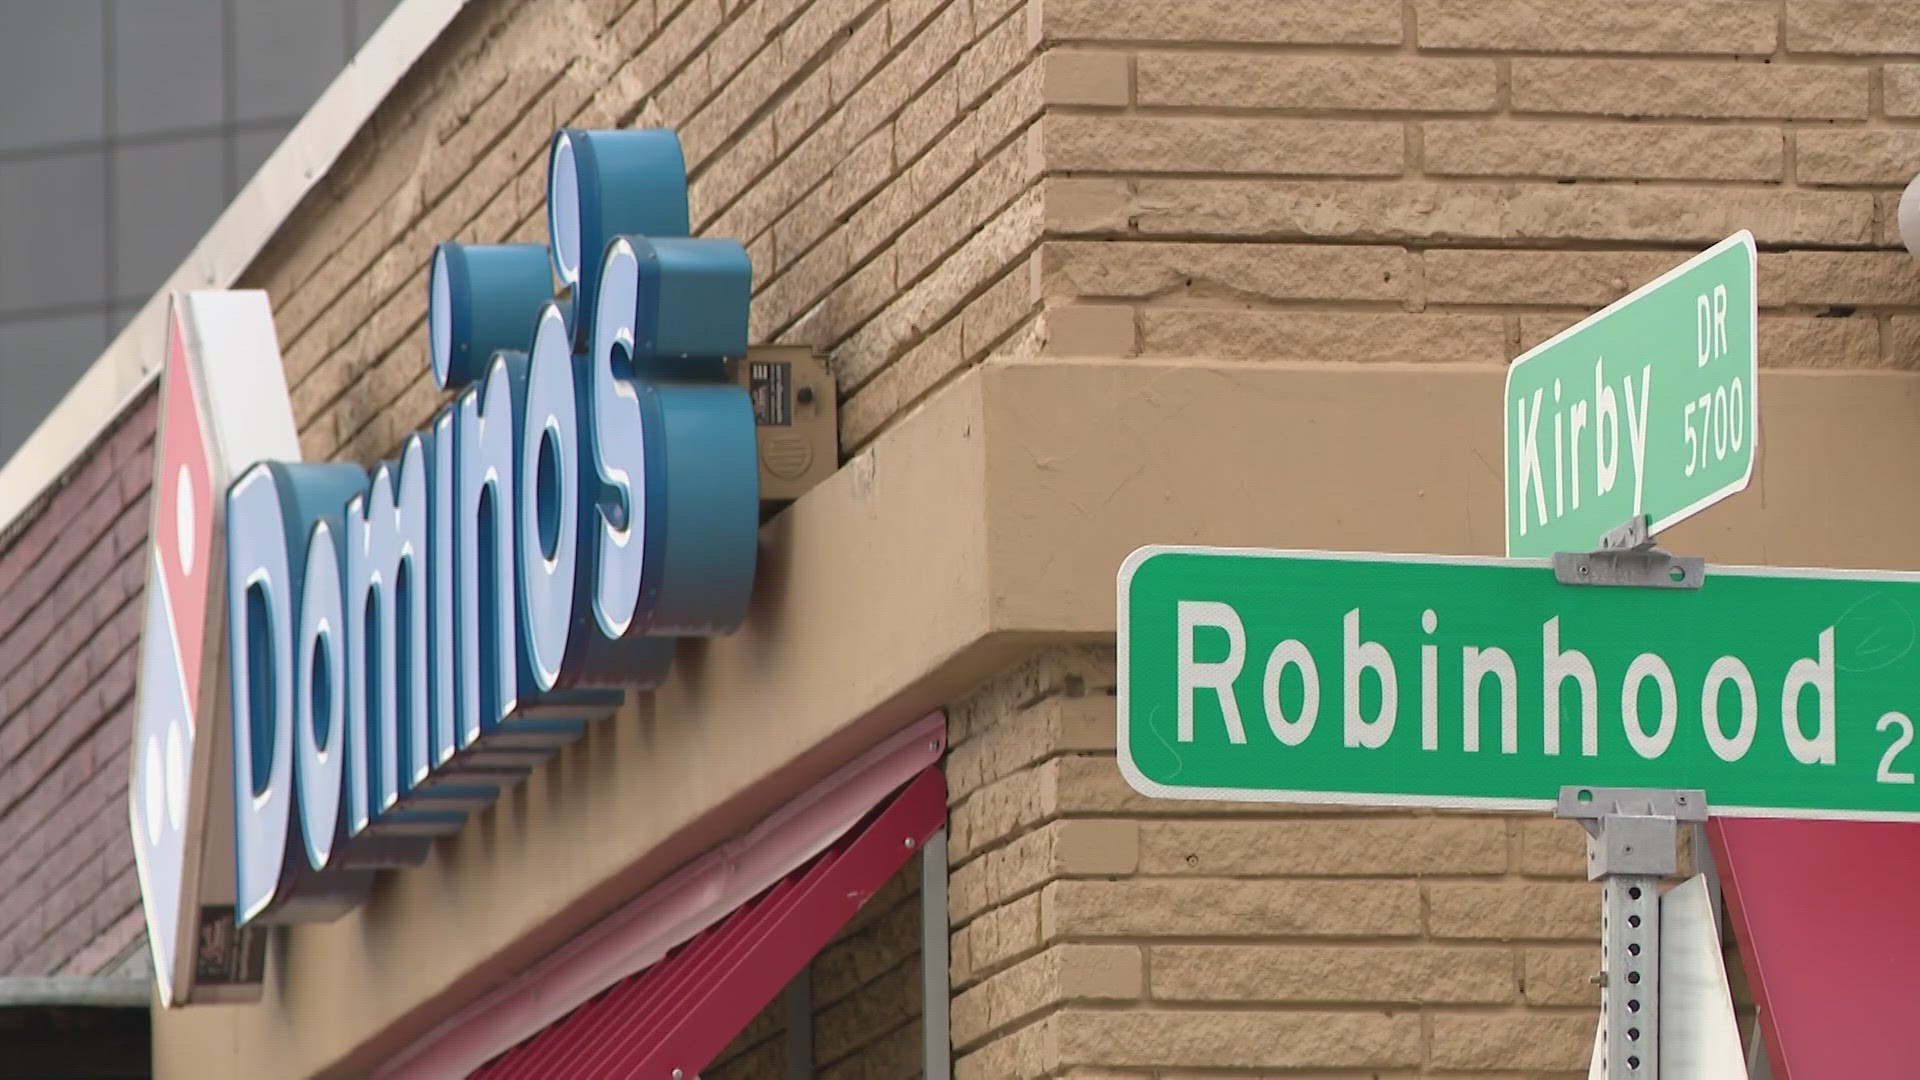 Another pizza delivery driver was robbed on Saturday near River Oaks. It's unclear if the same thieves committed both robberies.